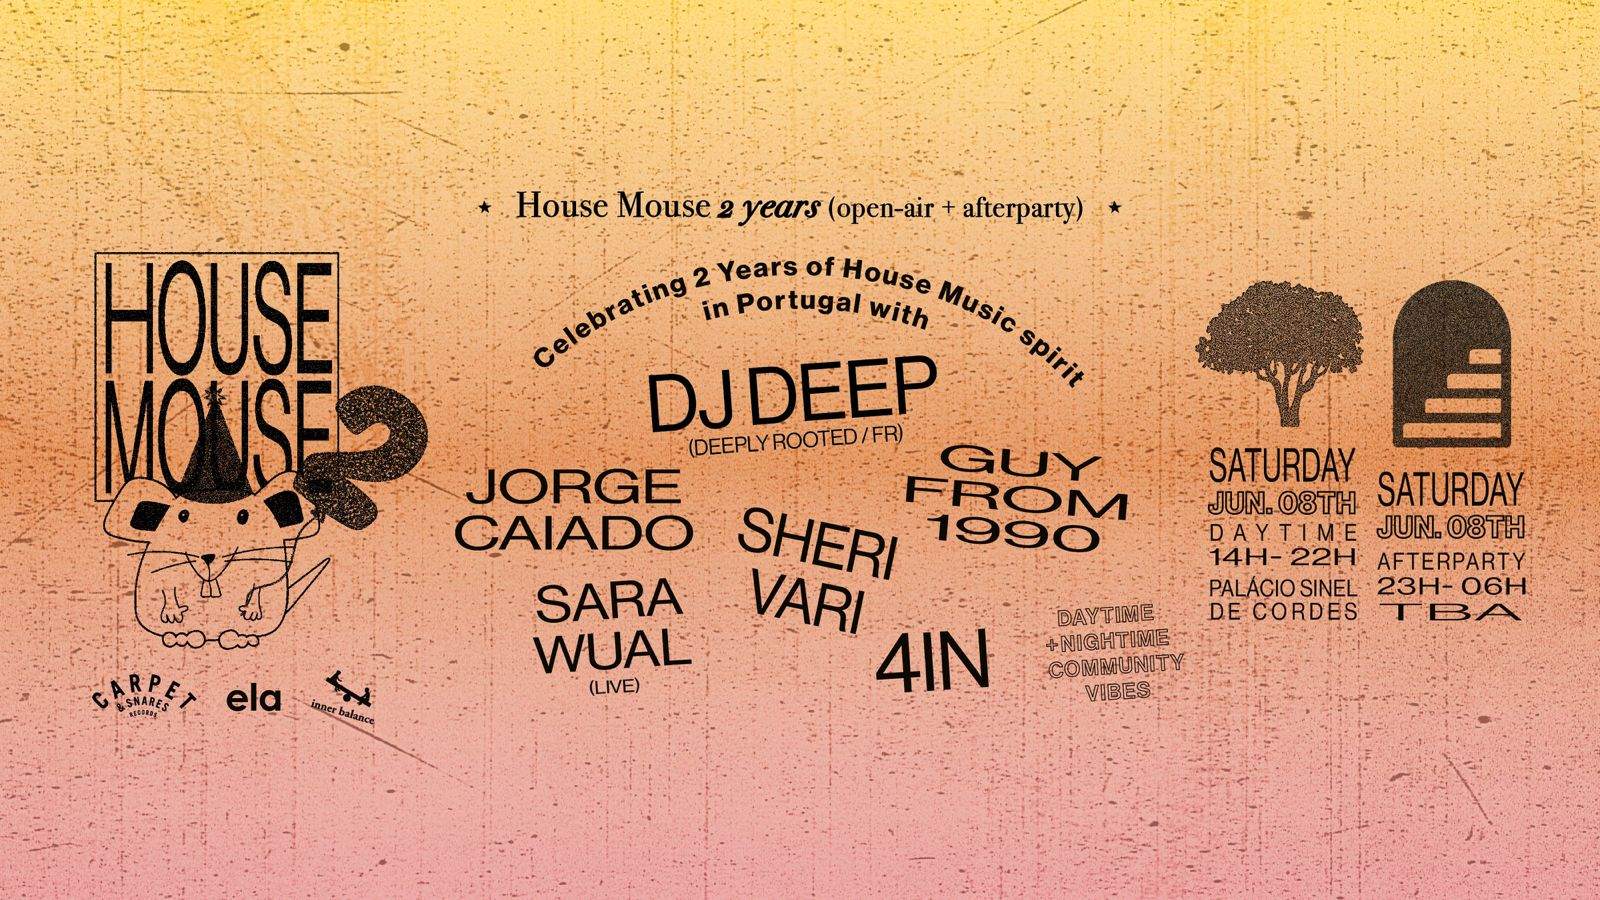 House Mouse 2 Years with DJ Deep - フライヤー表